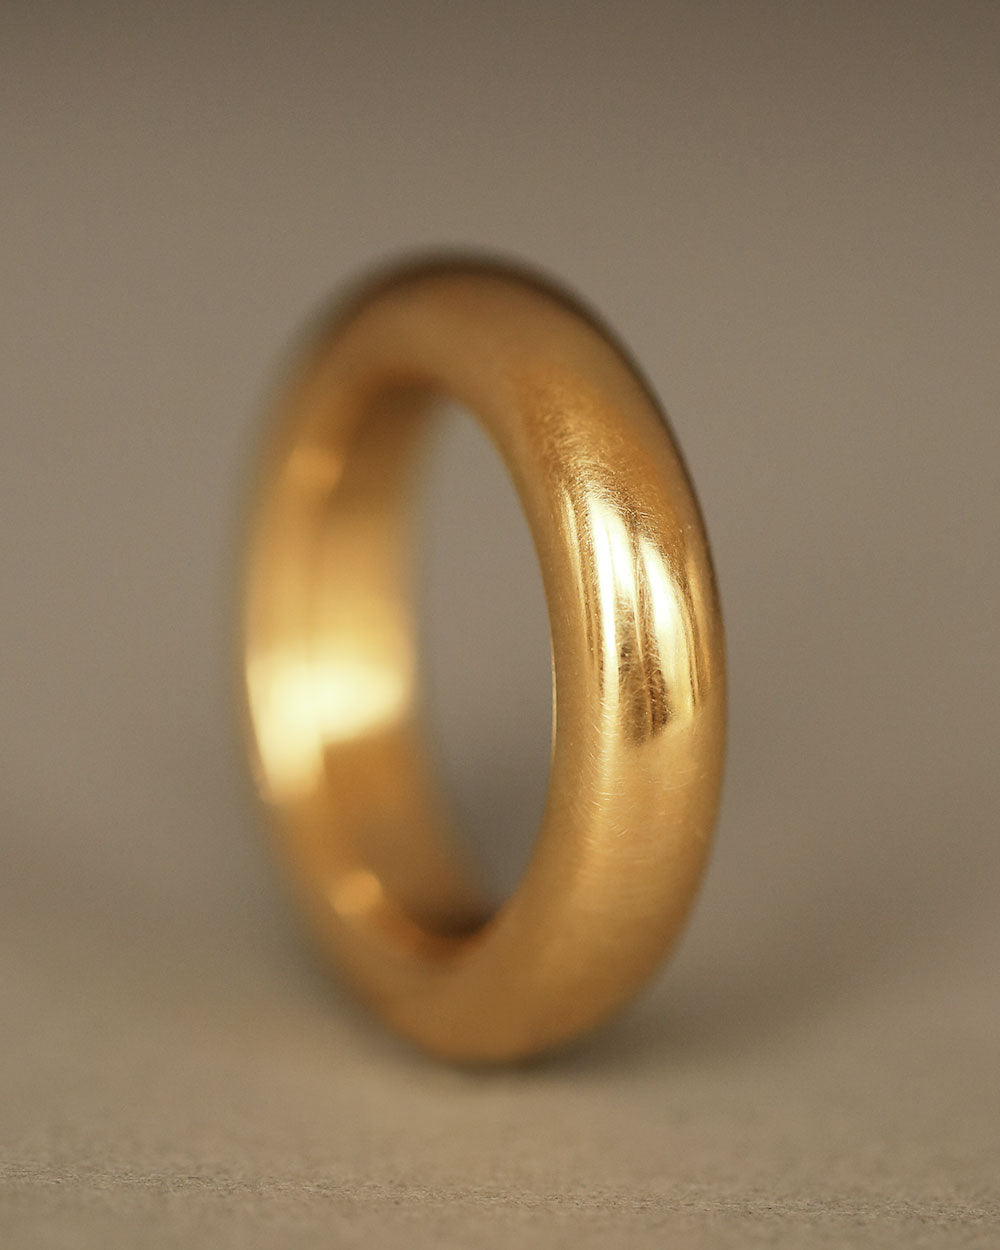 Large 18k solid yellow gold donut ring on gray paper. By George Rings. Dominus Band Grand